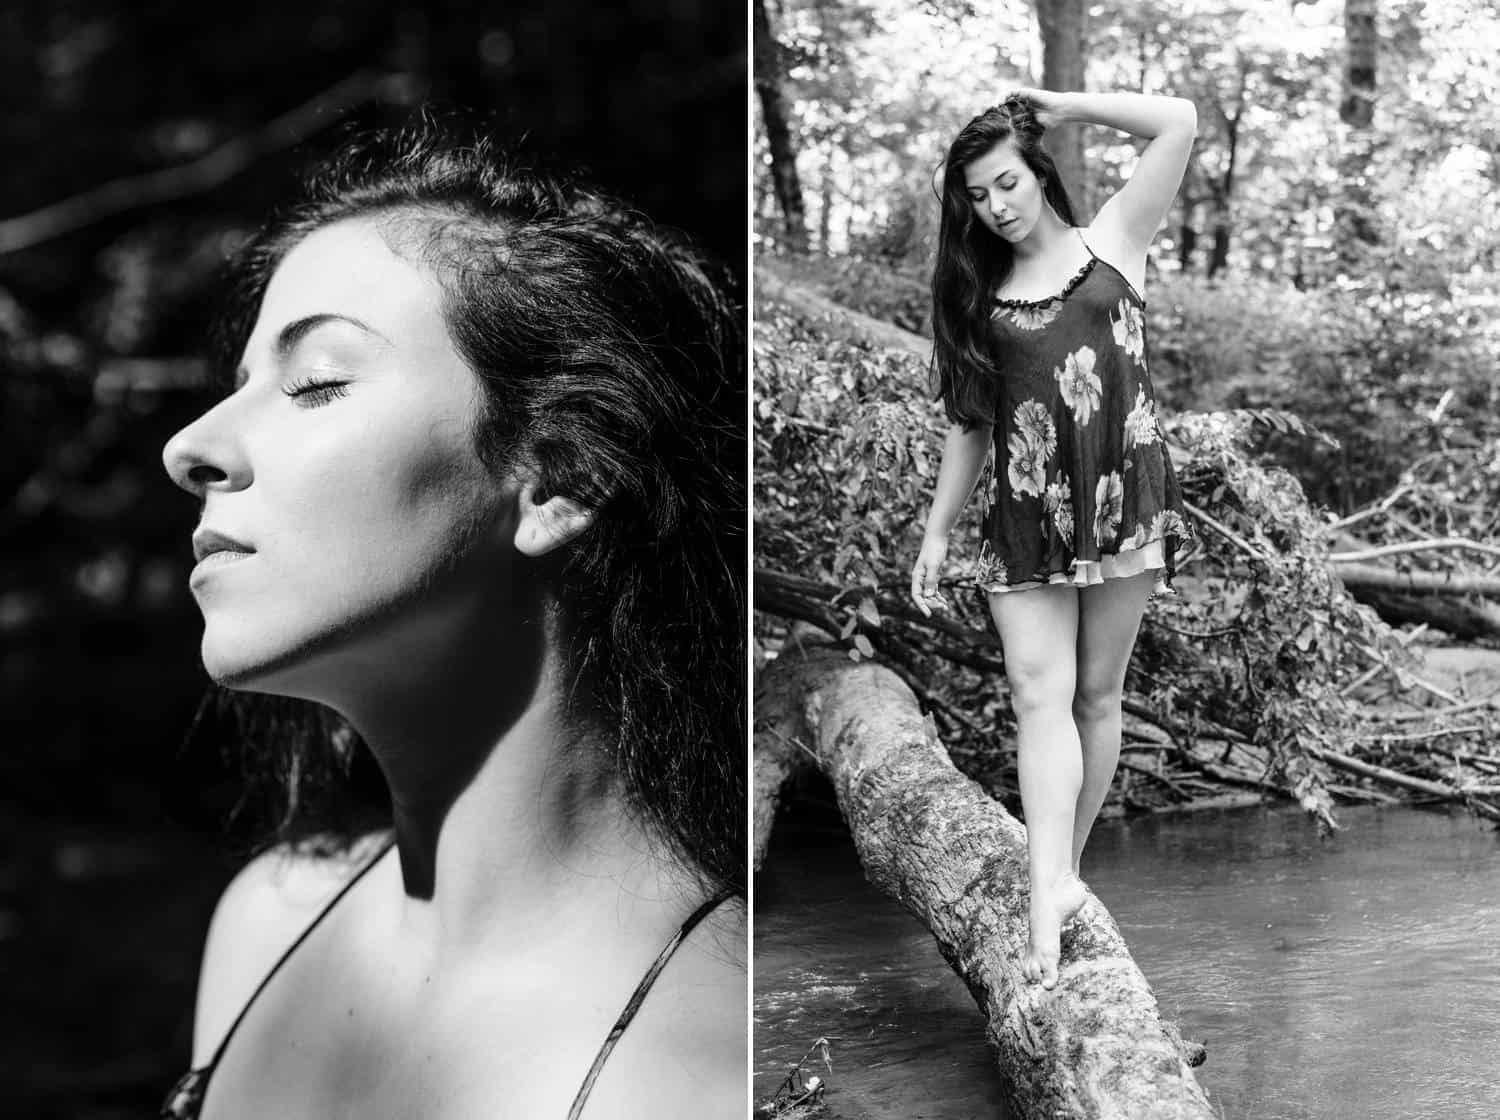 In portrait one, a woman closes her eyes and tilts her face toward the sun. In the next photo, that same woman tip-toes across a fallen log that has created a natural bridge over a creek. In both photos she's wearing a floral nightie that perfectly complements her outdoor boudoir session.